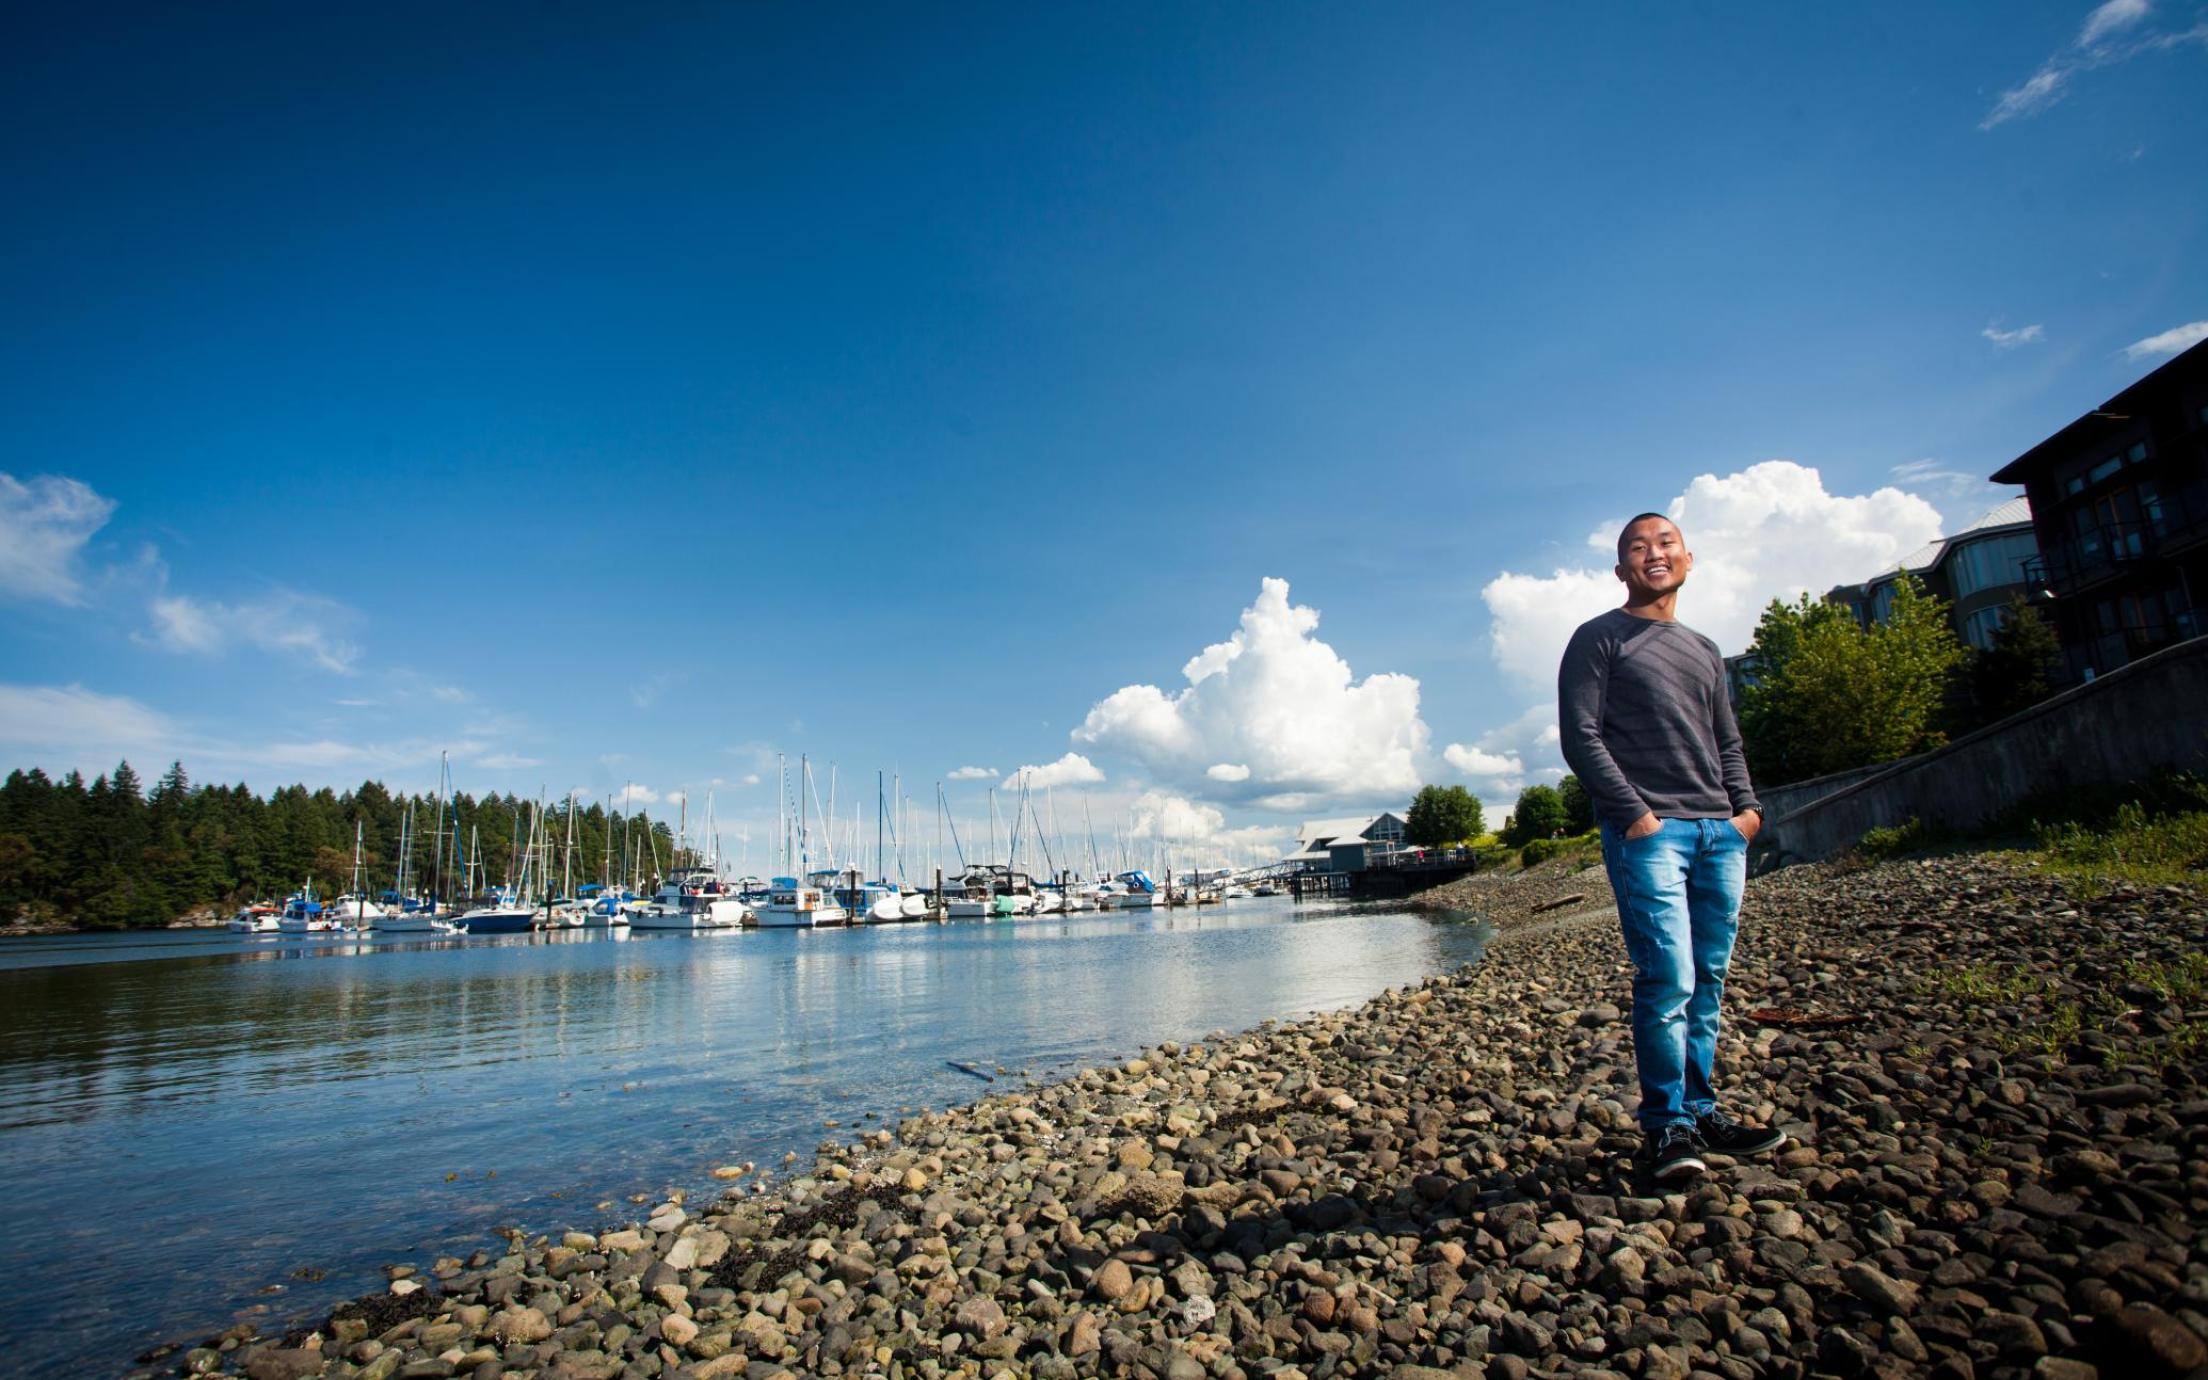 A man stands in the foreground with the waterfront and a marina full of boats behind him